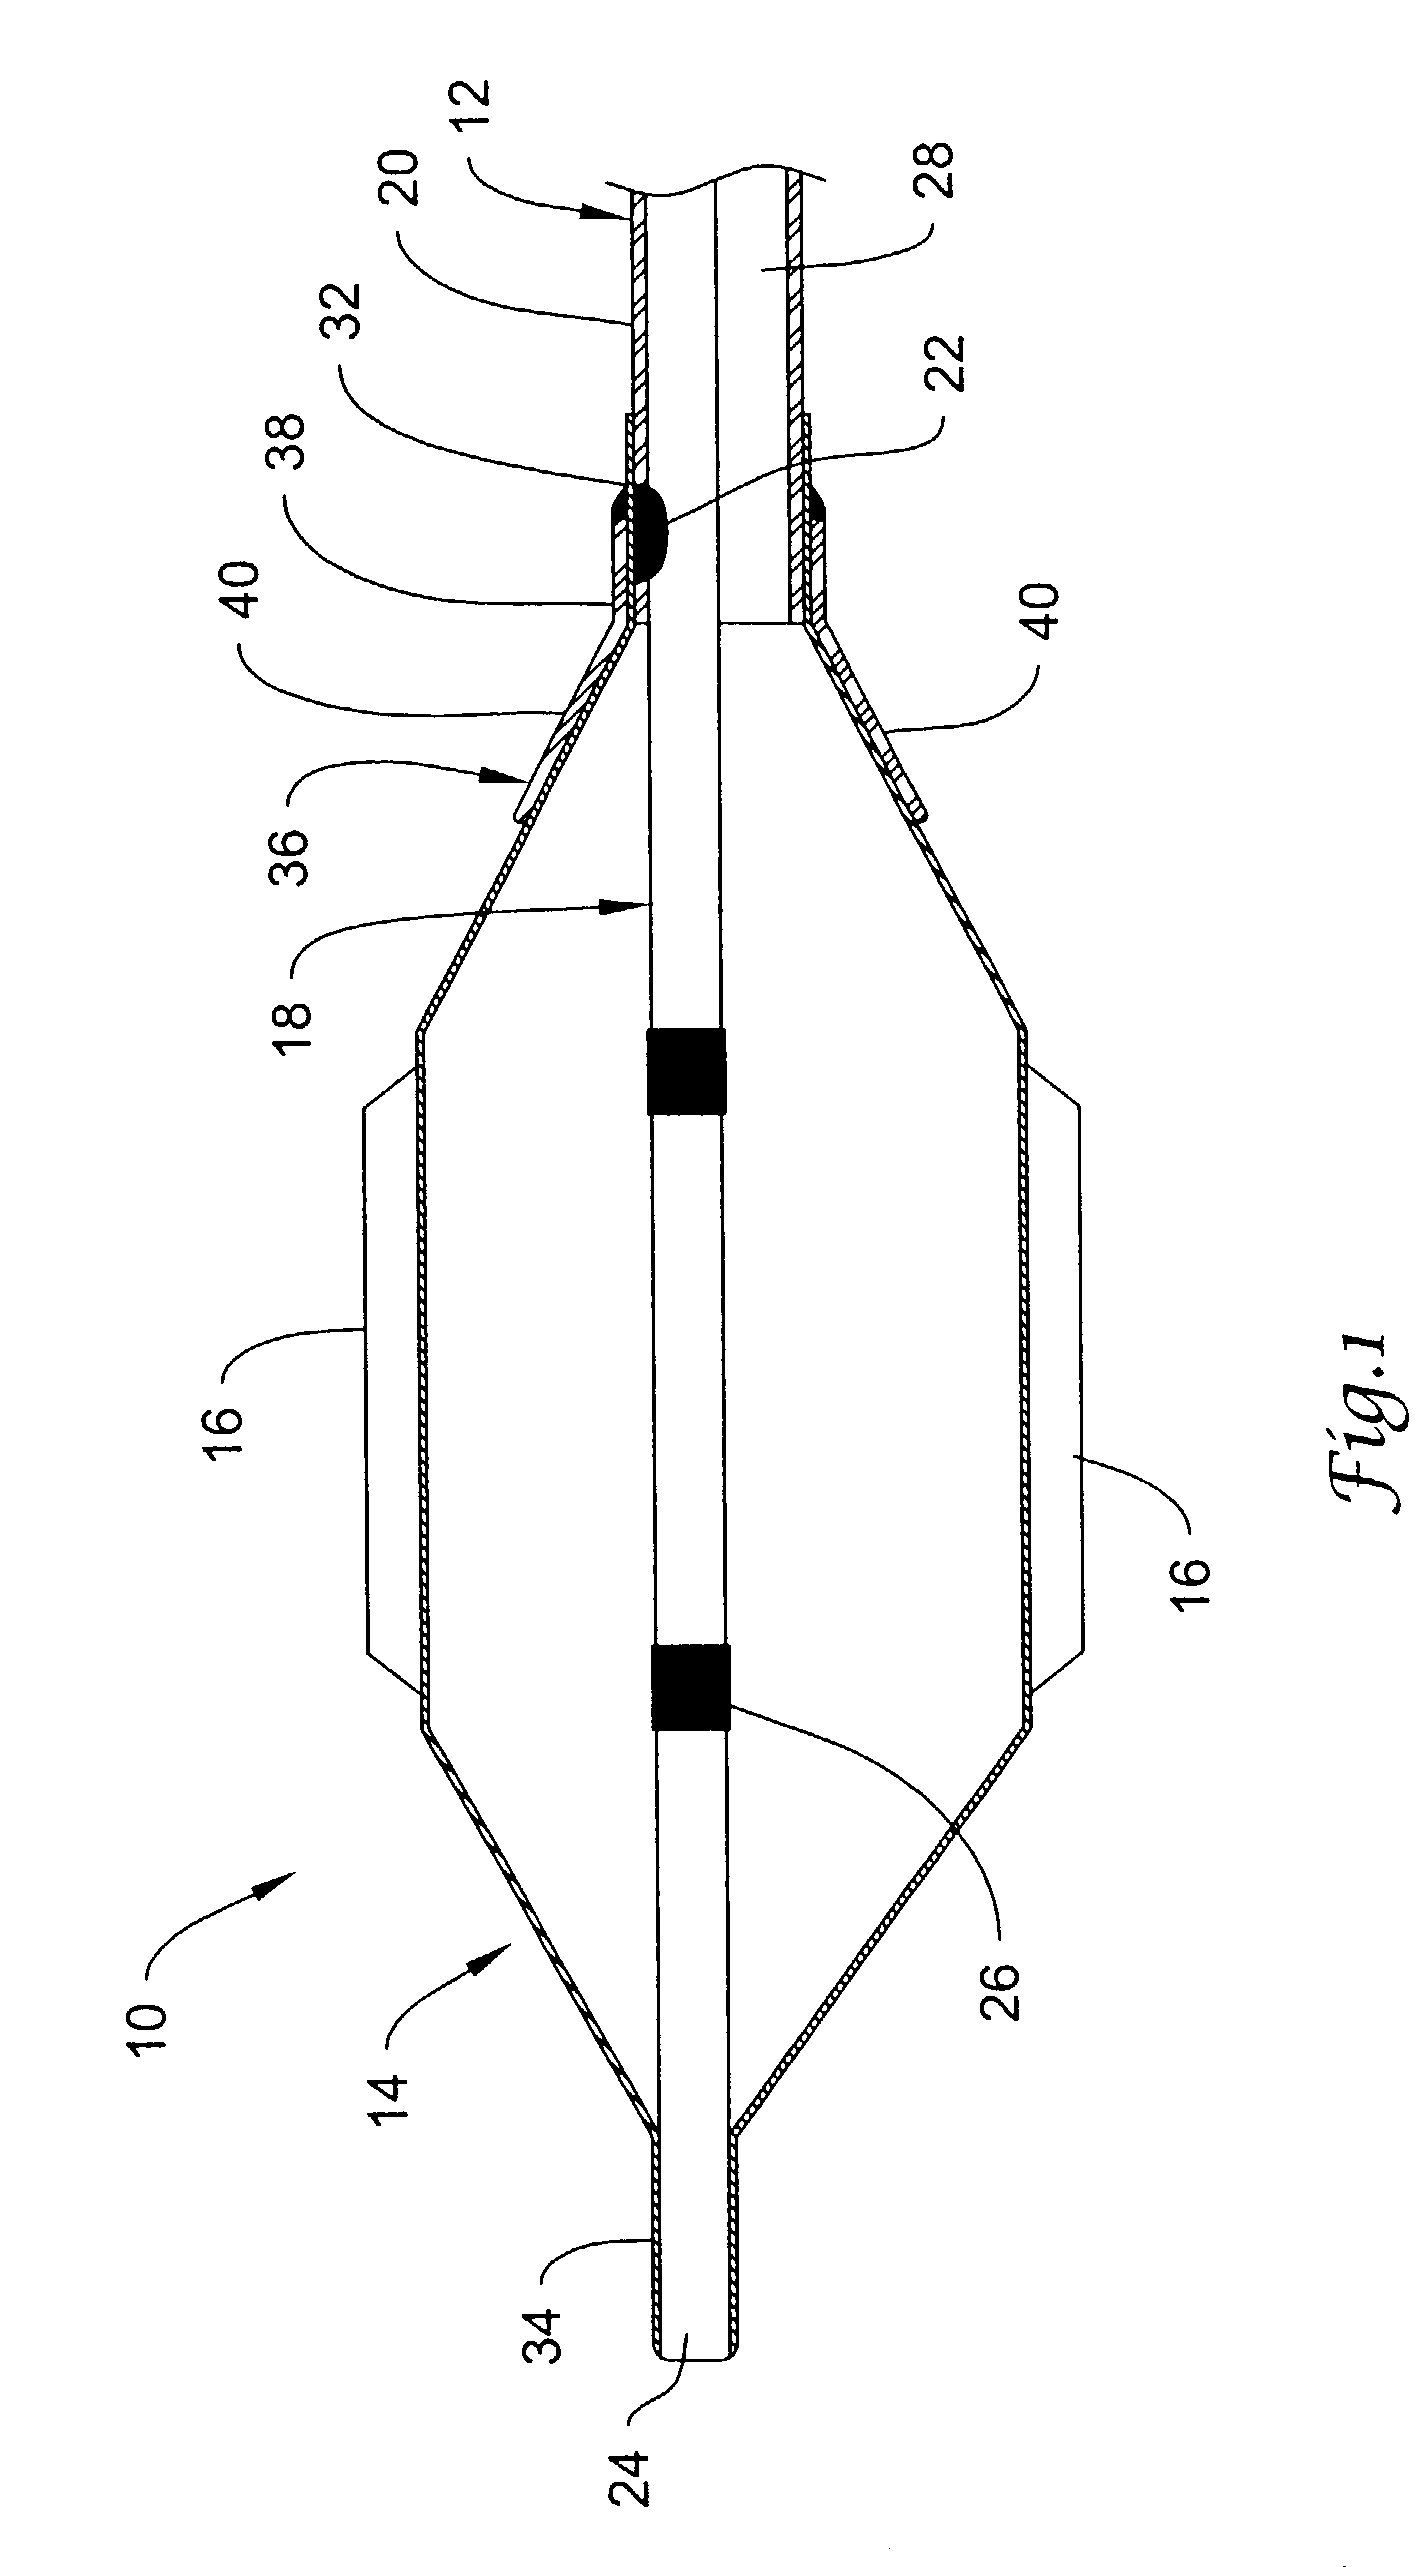 Cutting balloon catheter with improved balloon configuration